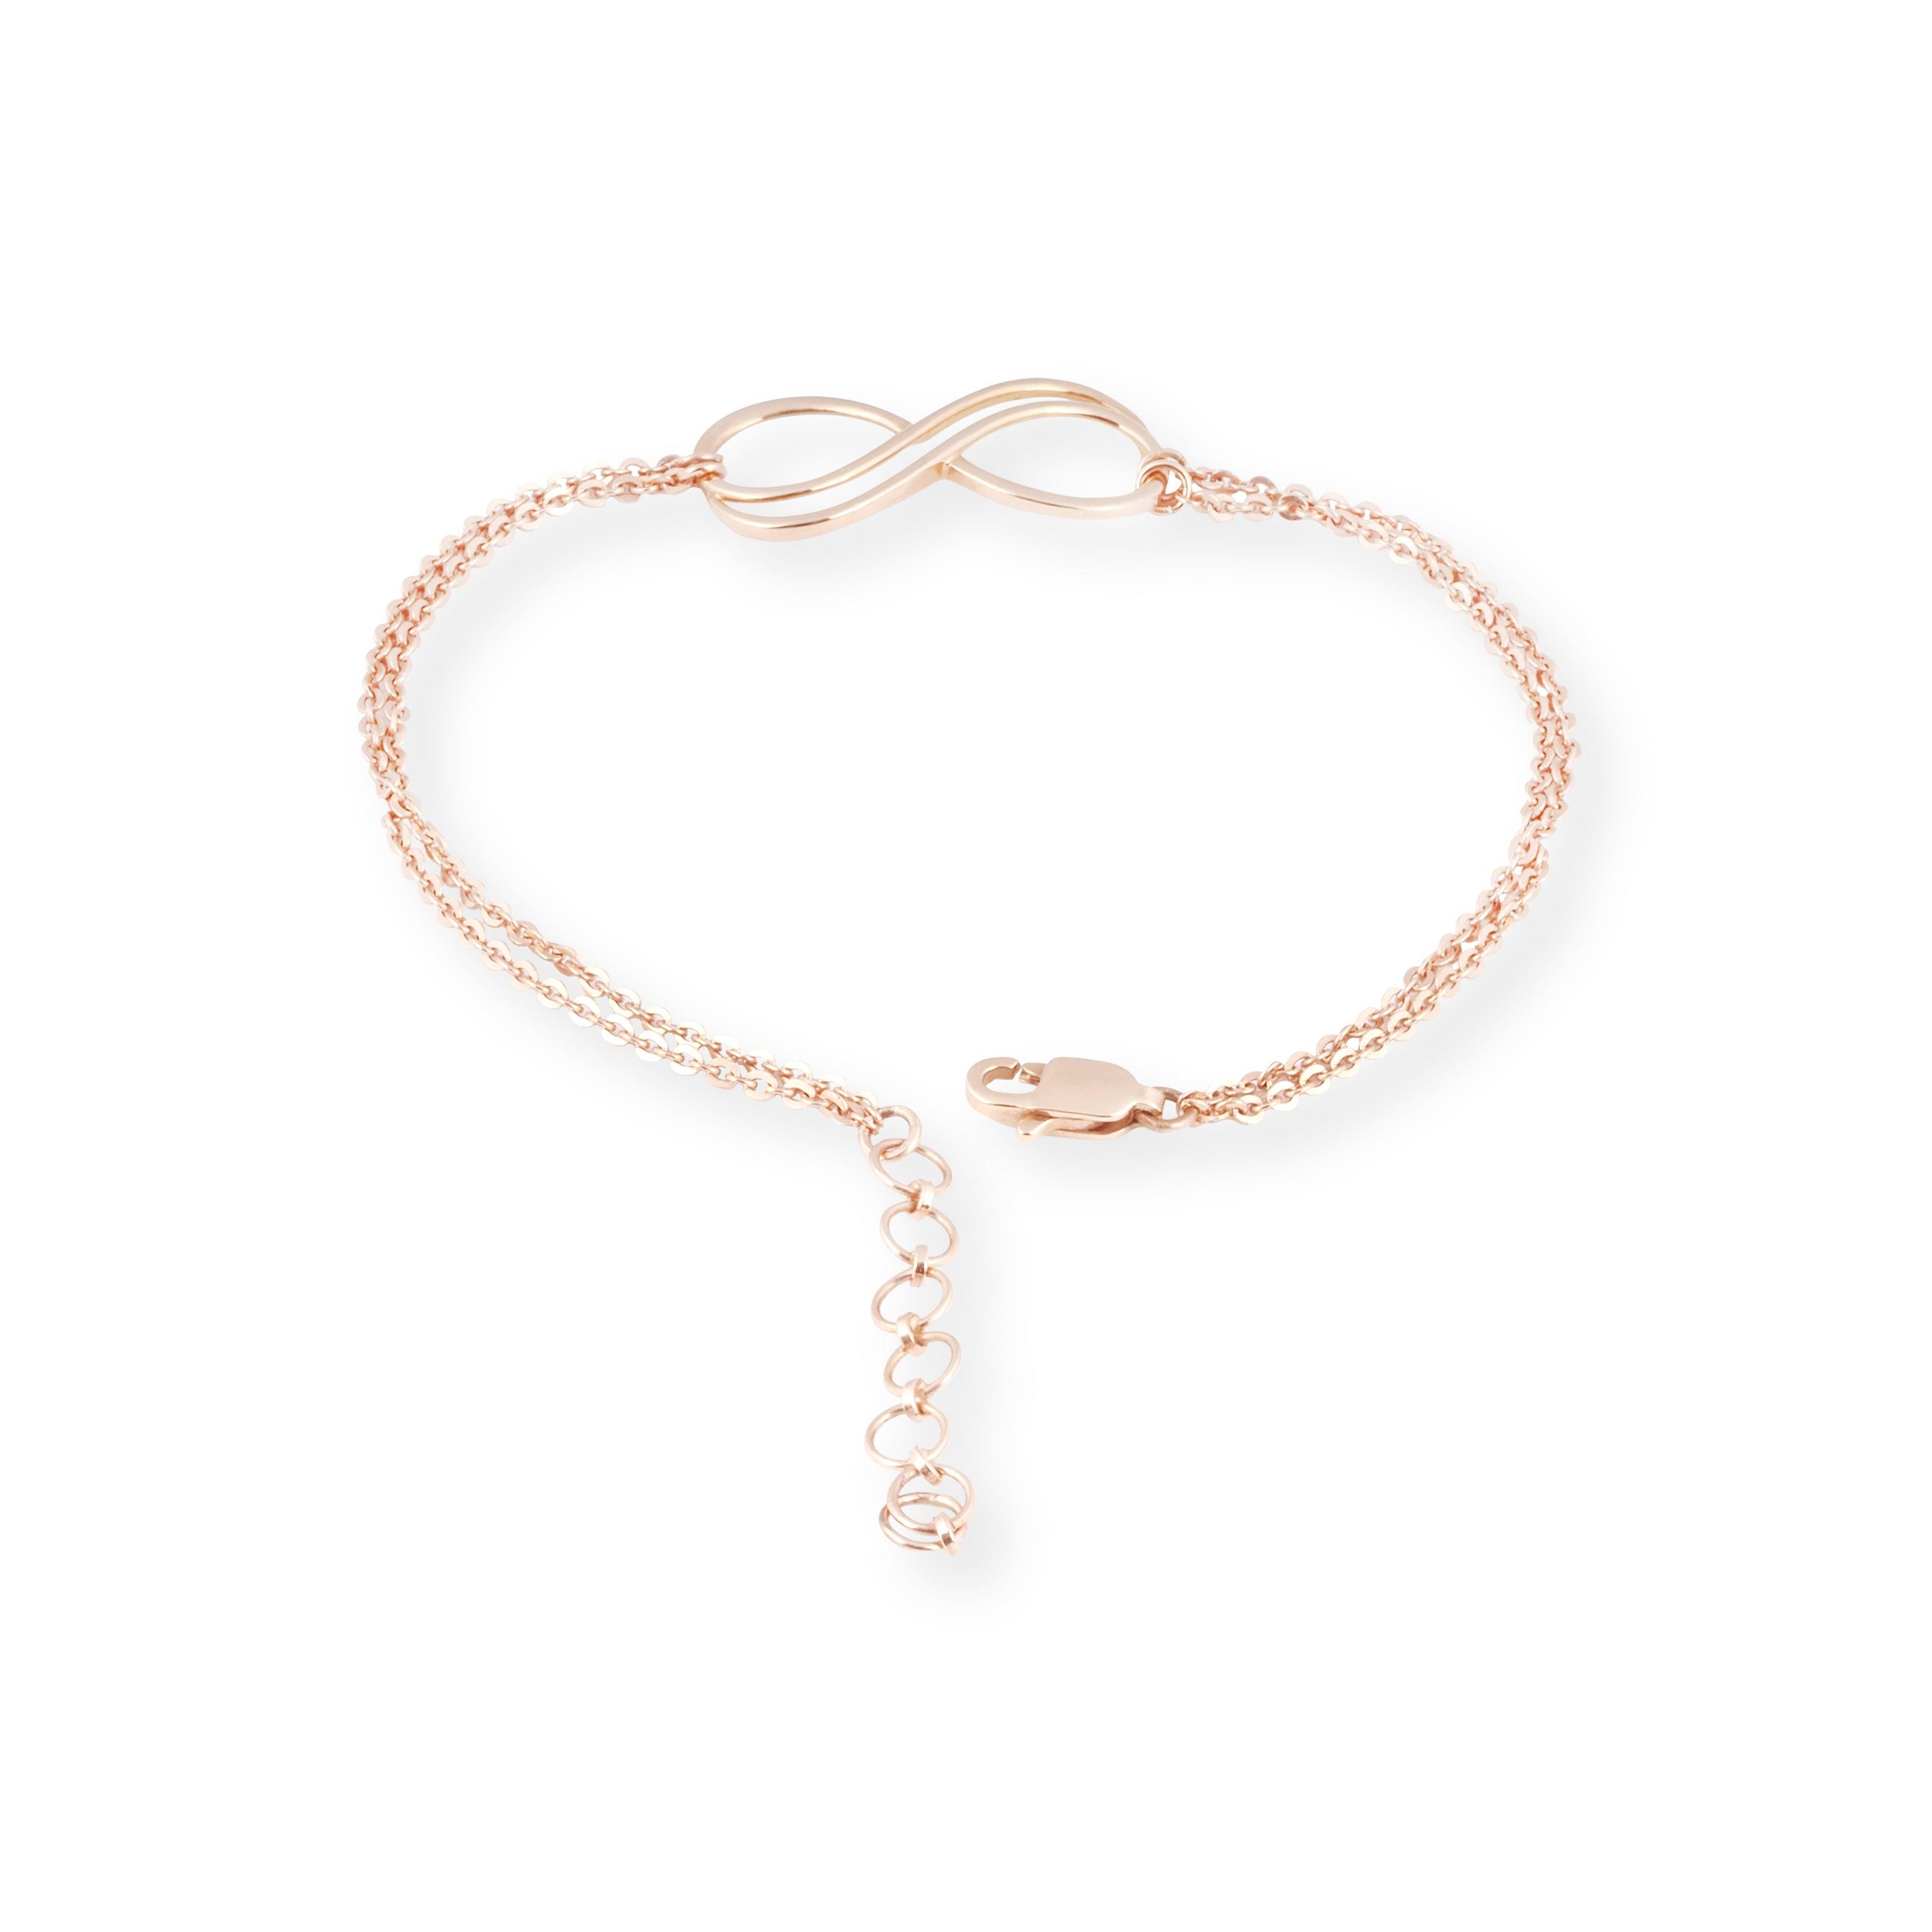 18ct Rose Gold Infinity Bracelet with Adjustable Lobster Clasp LBR-8523 - Minar Jewellers